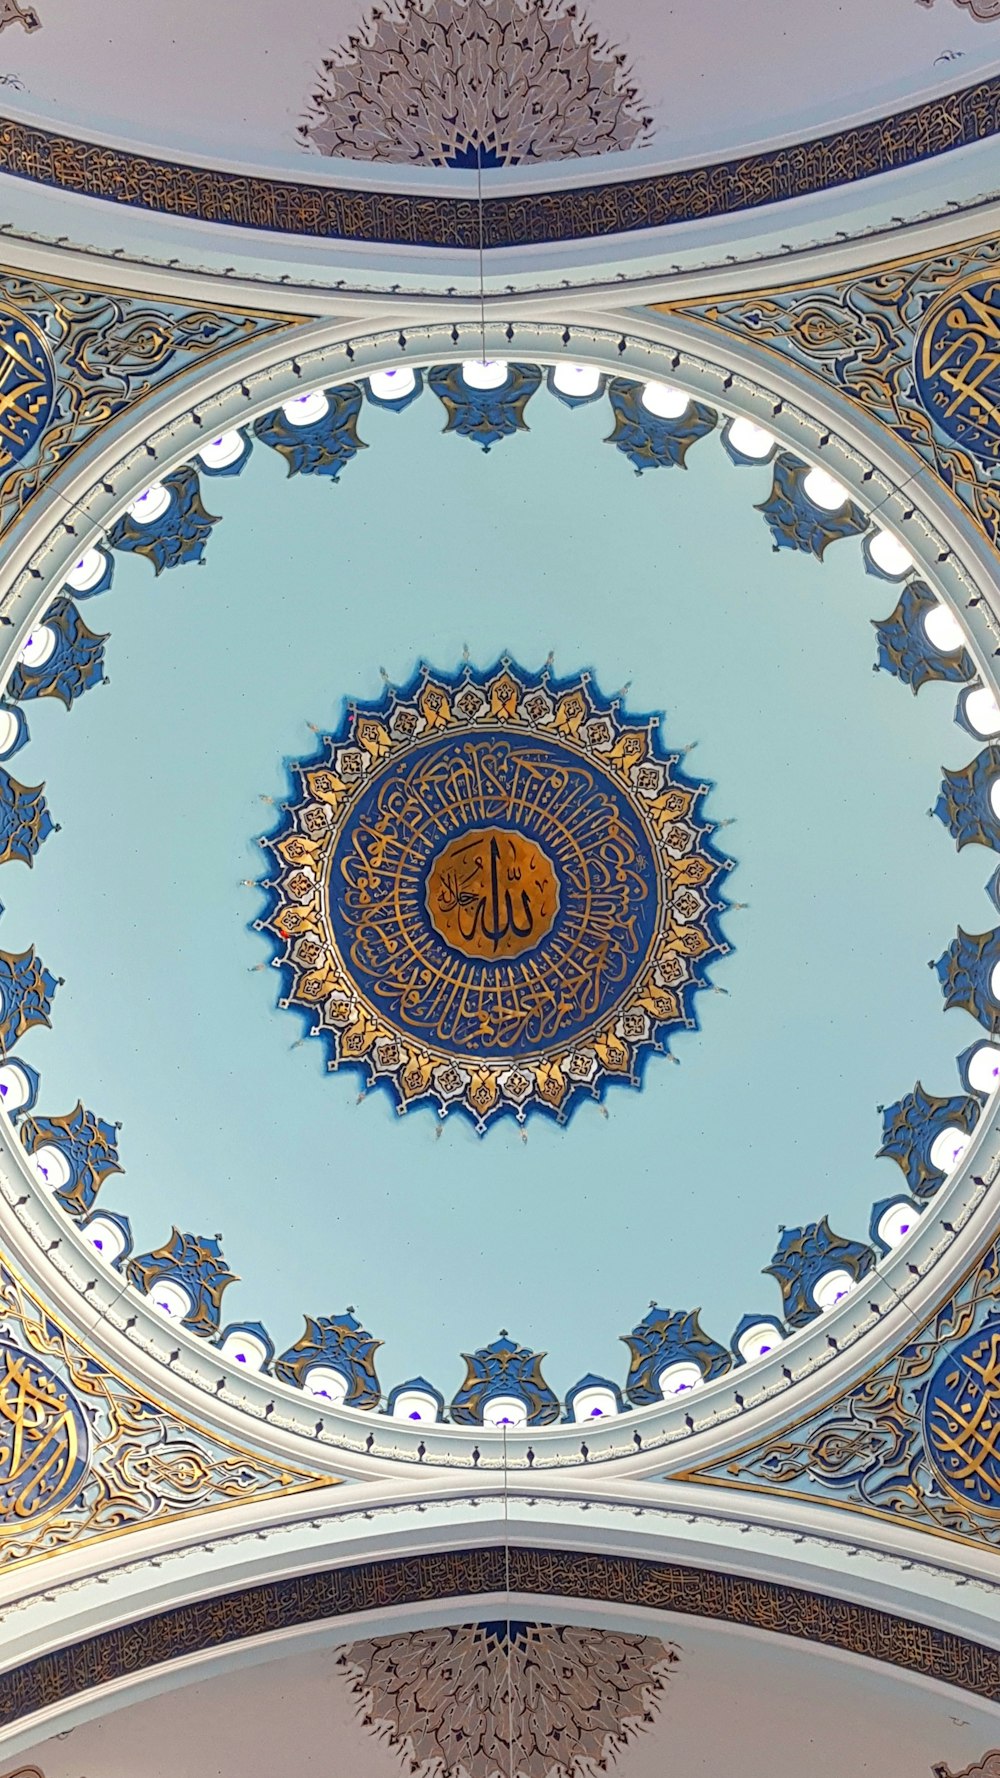 the ceiling of a building with a blue and gold design